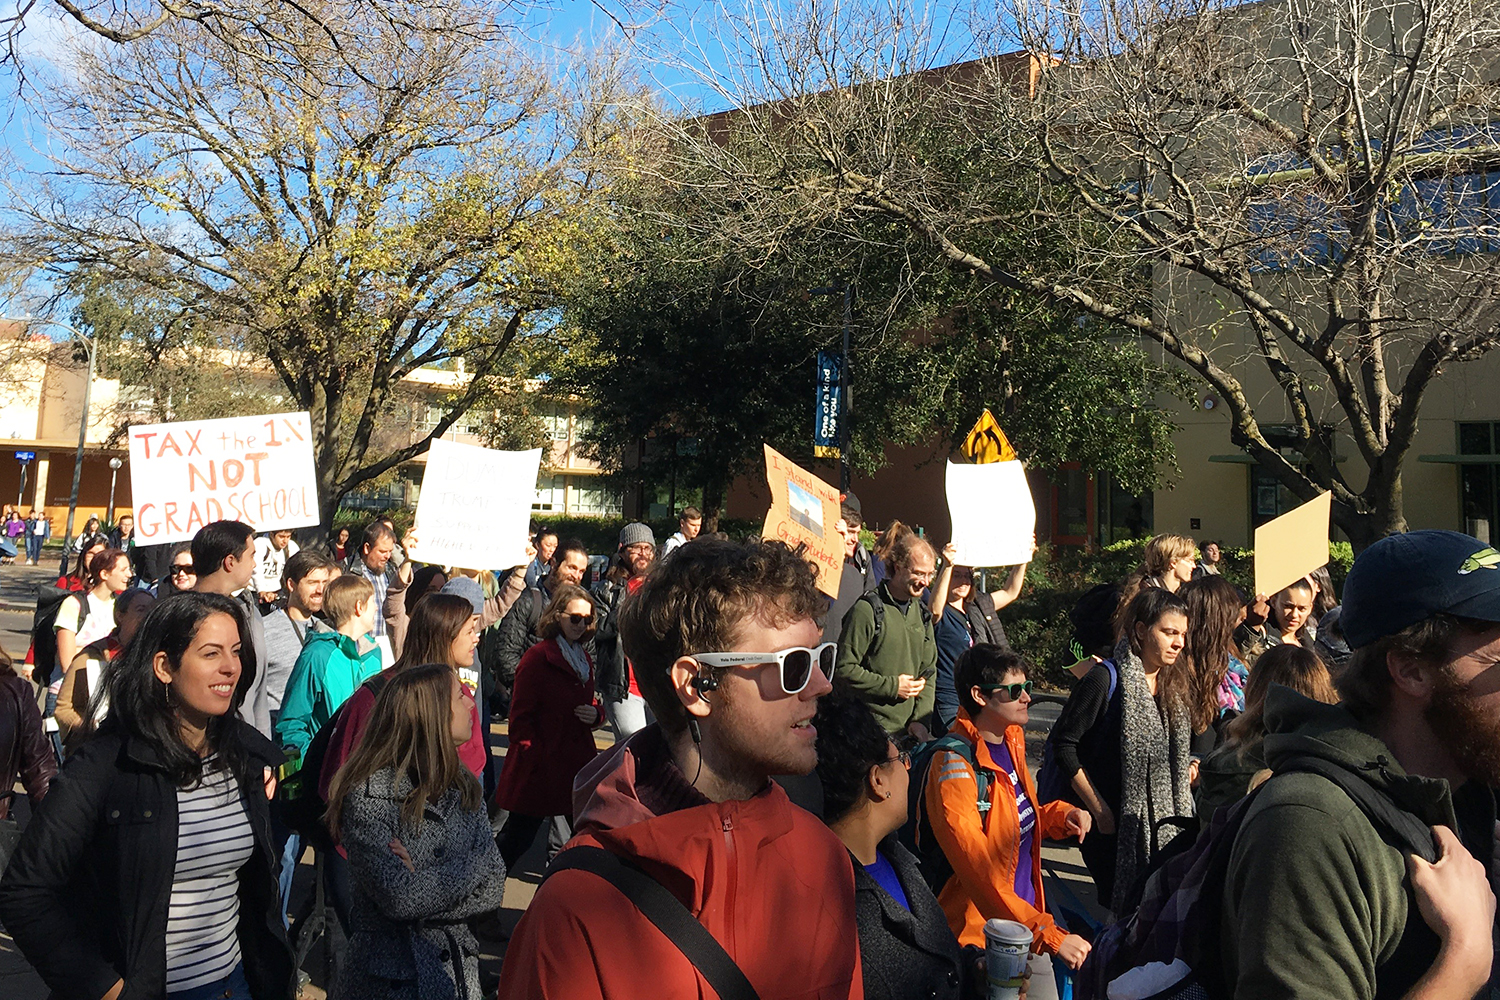 UC Davis graduate students march to protest a new tax bill that would repeal tuition-free waivers. Greg Watry/UC Davis